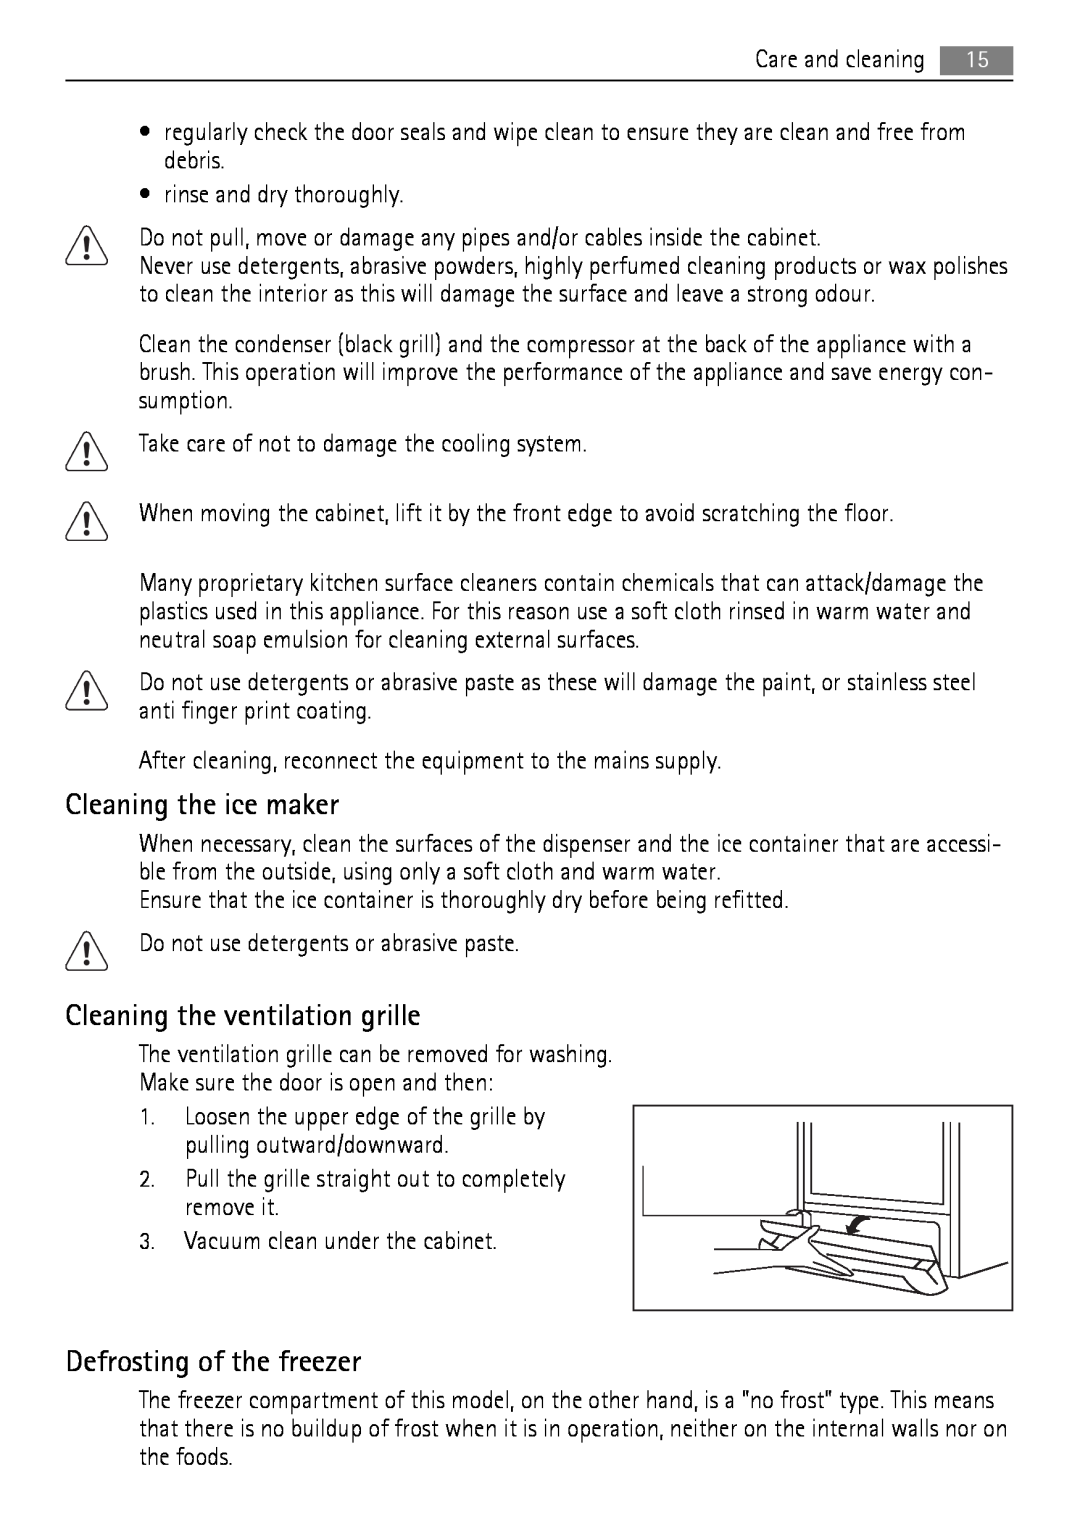 AEG A92860GNB0 user manual Cleaning the ice maker, Cleaning the ventilation grille, Defrosting of the freezer 